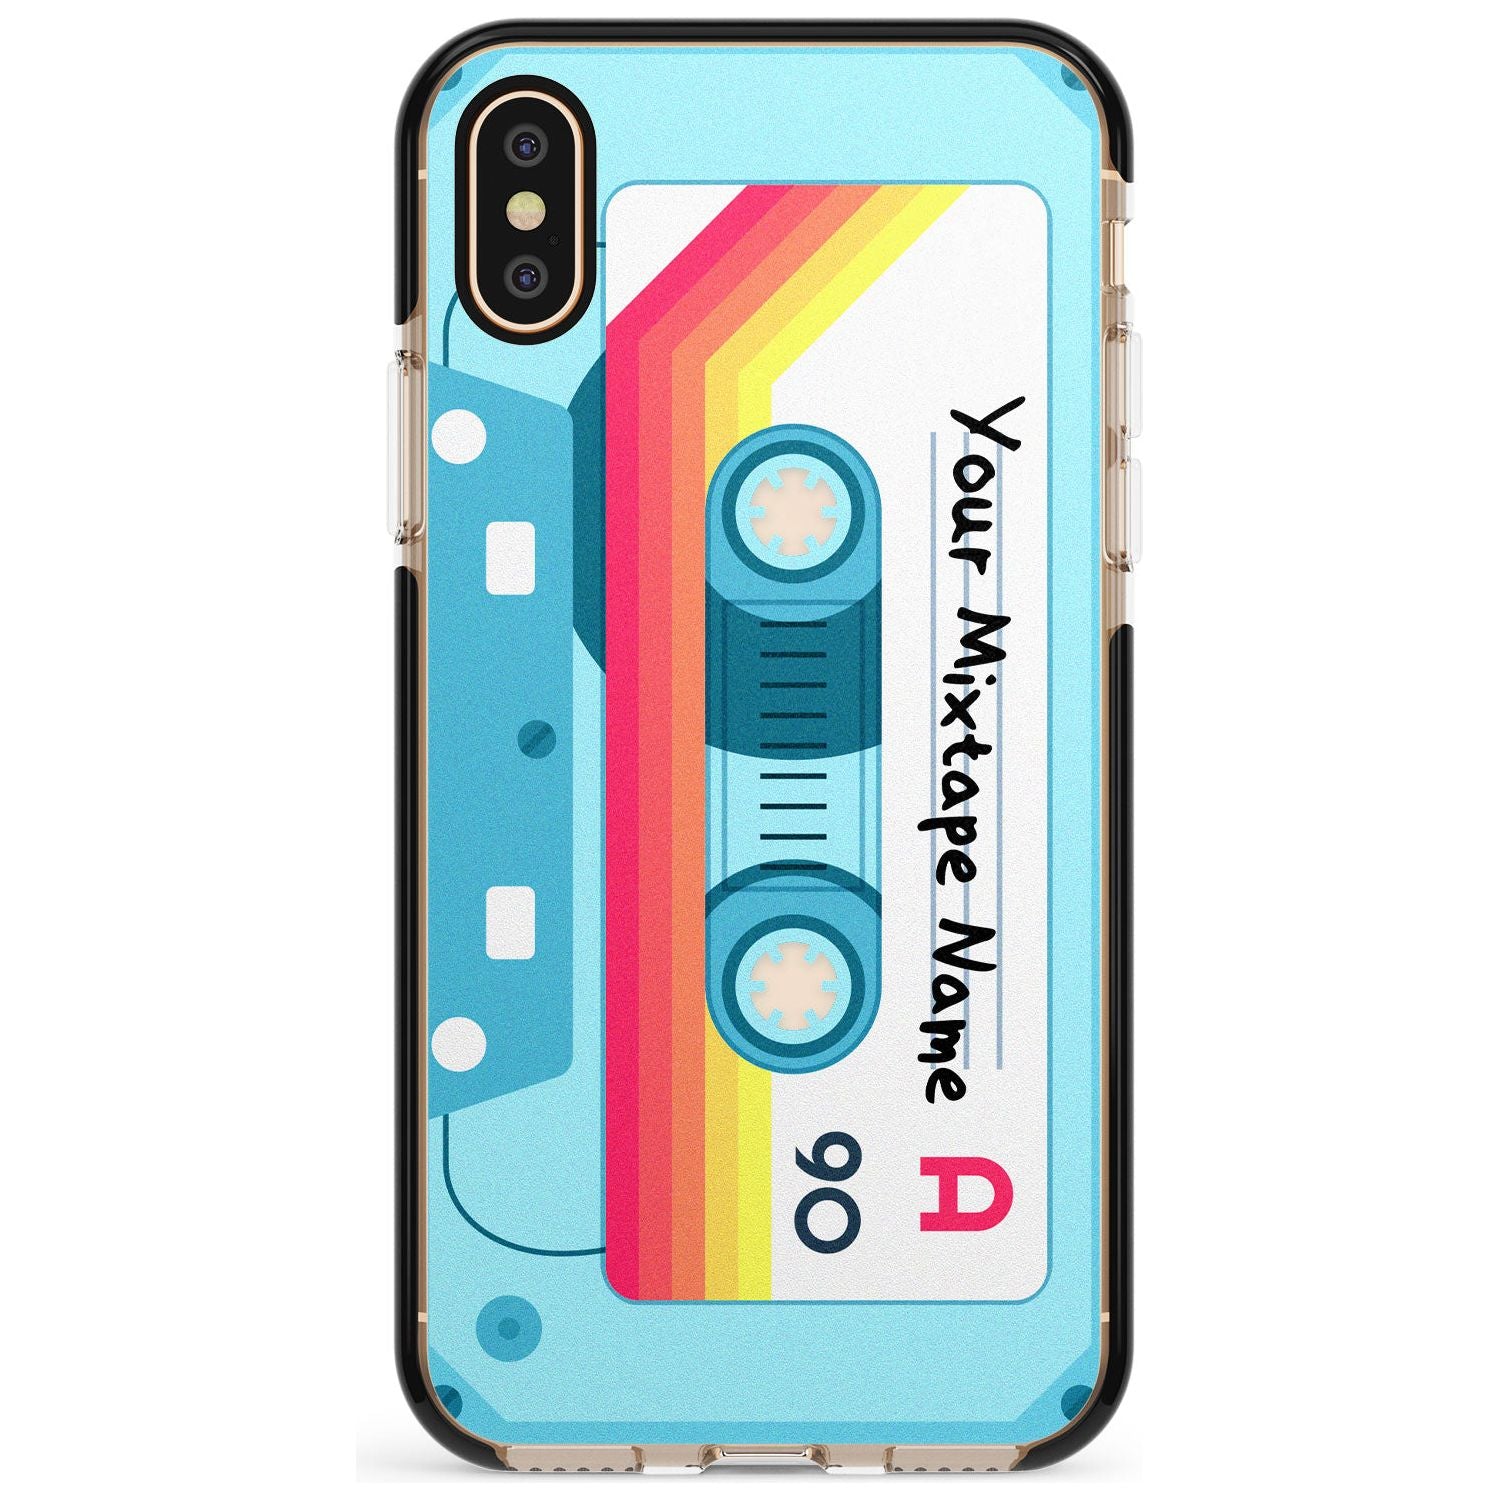 Sporty Cassette Pink Fade Impact Phone Case for iPhone X XS Max XR